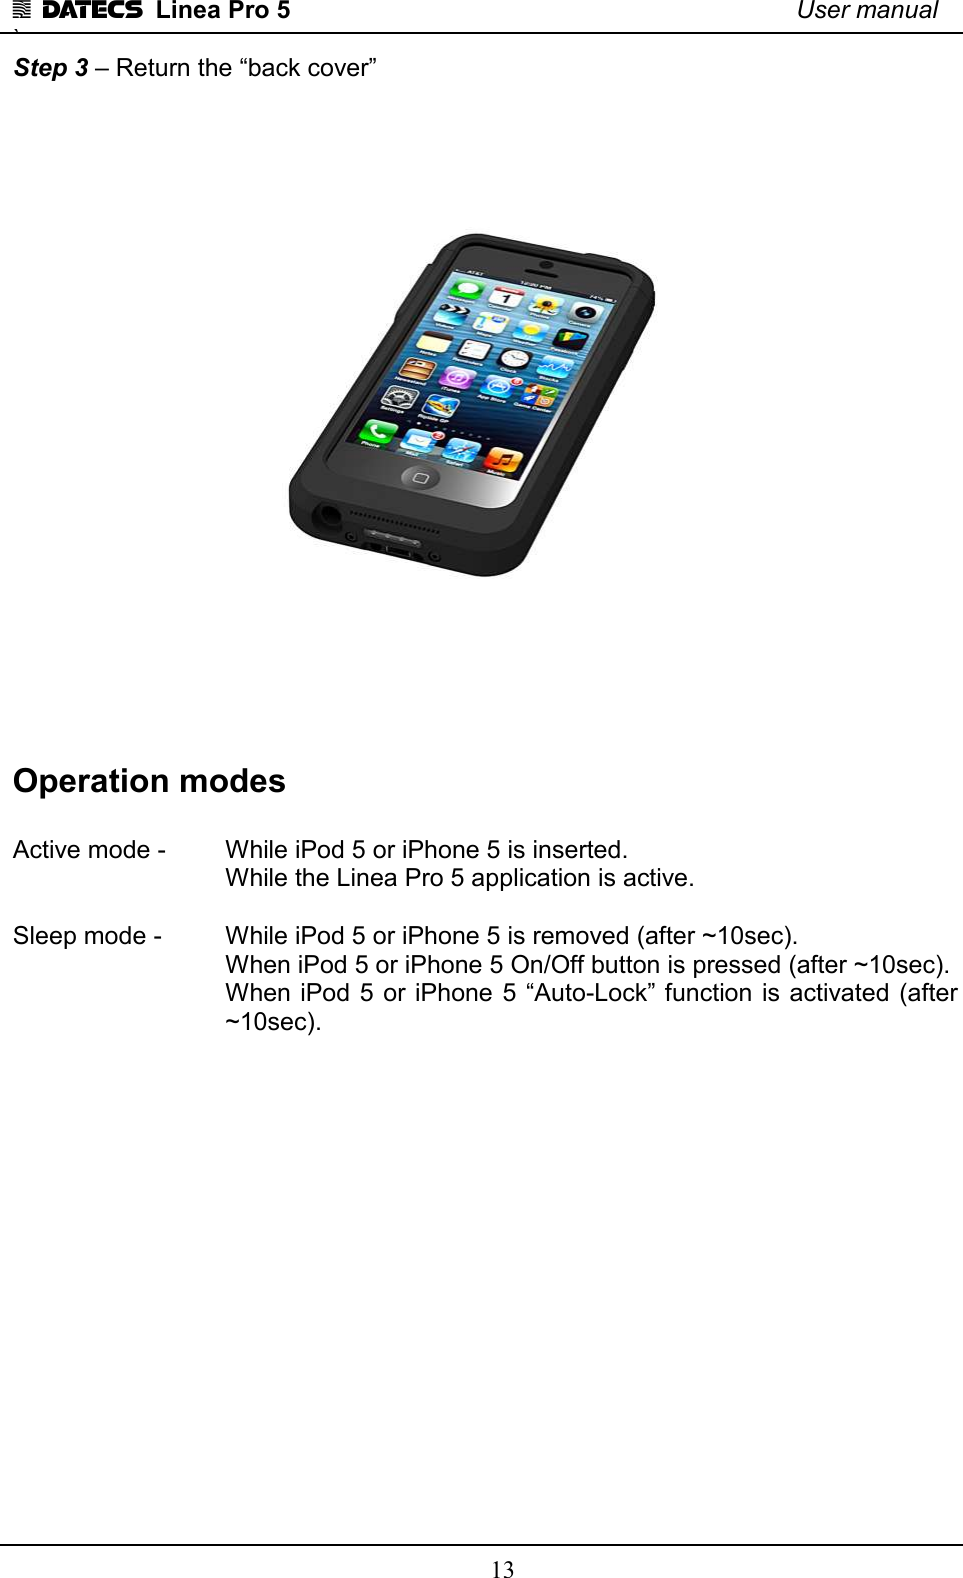 1 DATECS  Linea Pro 5    User manual `    13 Step 3 – Return the “back cover”    Operation modes  Active mode -   While iPod 5 or iPhone 5 is inserted.        While the Linea Pro 5 application is active.   Sleep mode -   While iPod 5 or iPhone 5 is removed (after ~10sec).       When iPod 5 or iPhone 5 On/Off button is pressed (after ~10sec). When iPod 5  or iPhone 5 “Auto-Lock” function is activated (after ~10sec).                  